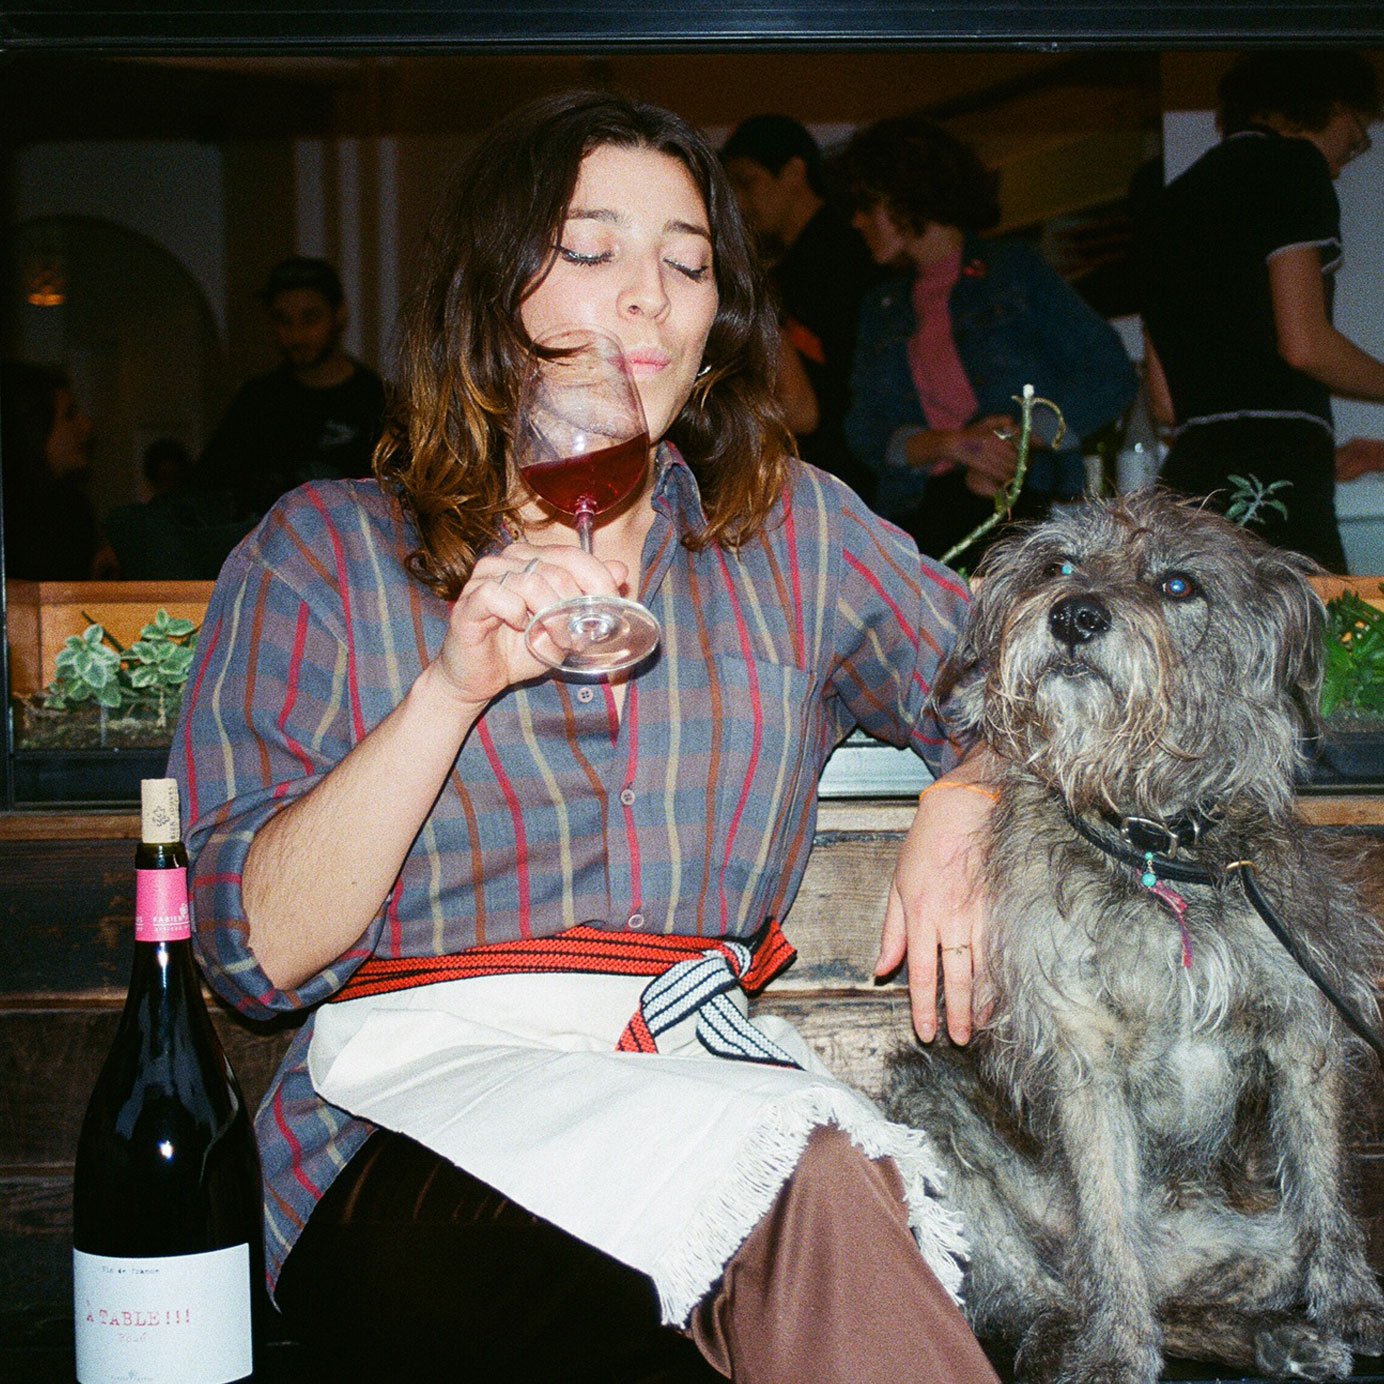 Meet the Tastemaker Bringing Natural Wine Education to NYC’s Coolest Restaurants